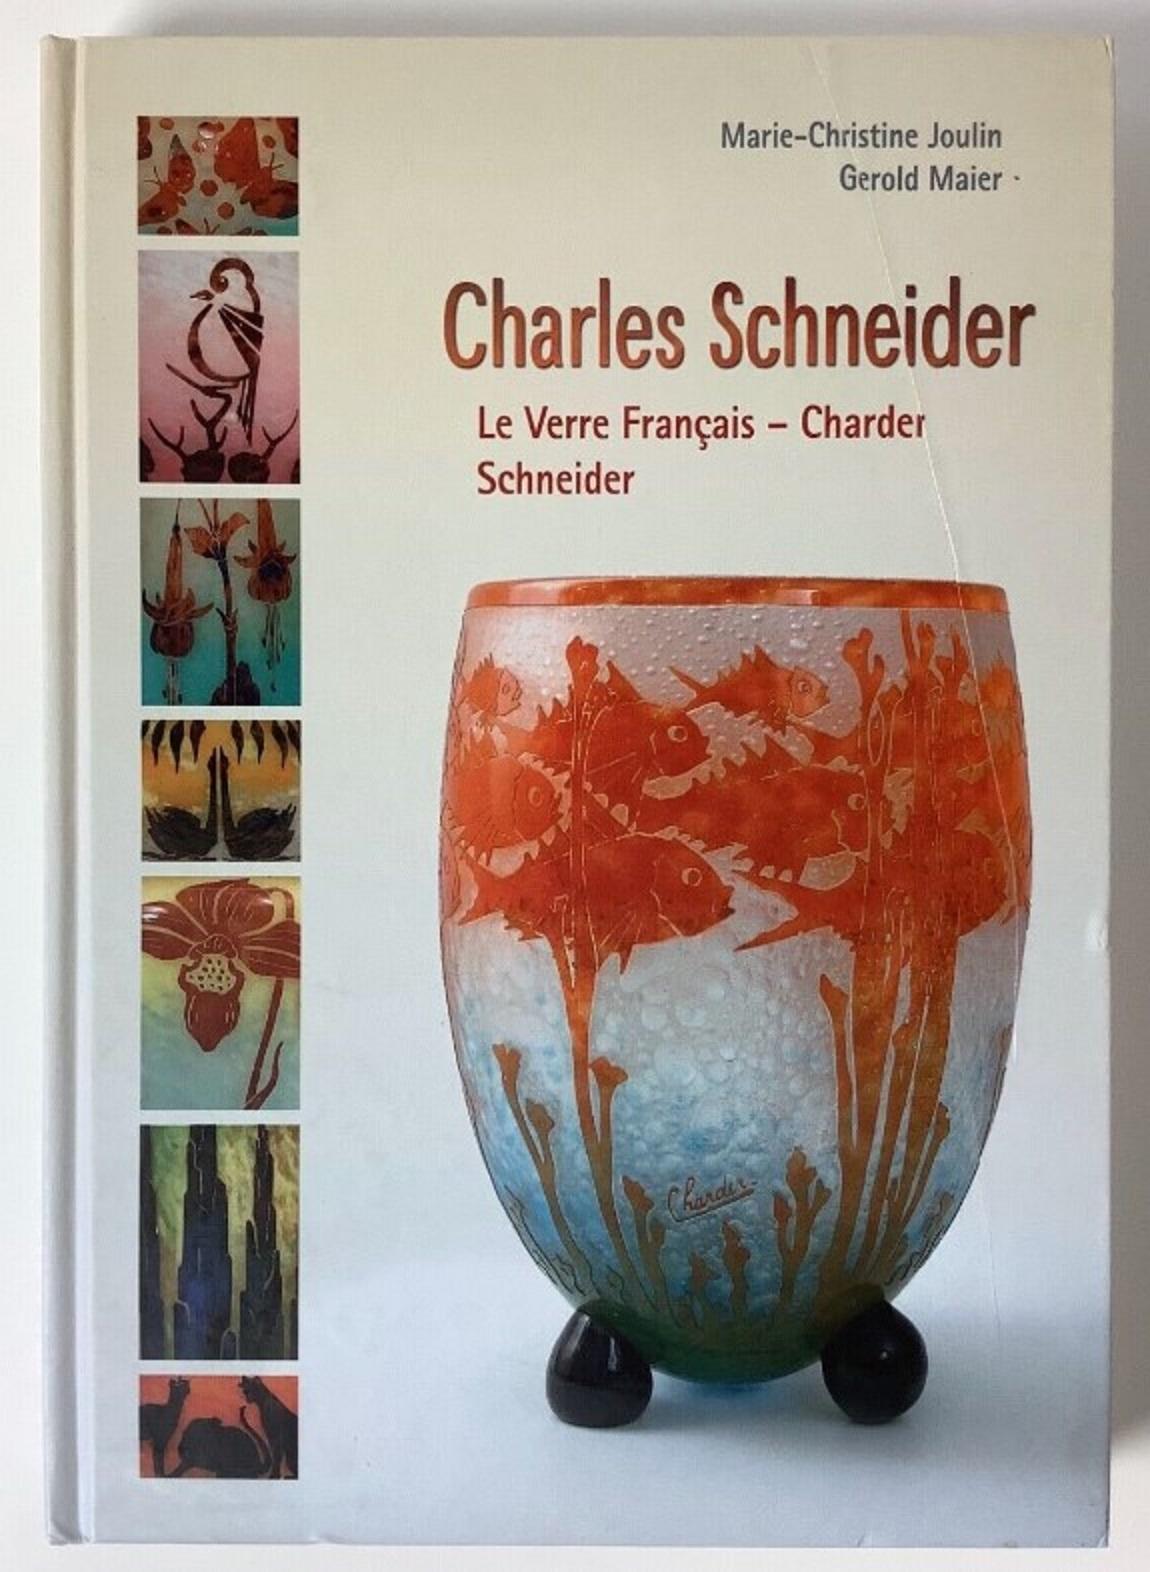 Sign: Charder
CHARDER was a name made up from the first part of Charles and the second part of Schnieder. It was sometimes marked on glass designed by Charles Schneider, particularly pieces in the Le Verre Francais line.
Le Verre Francais was a